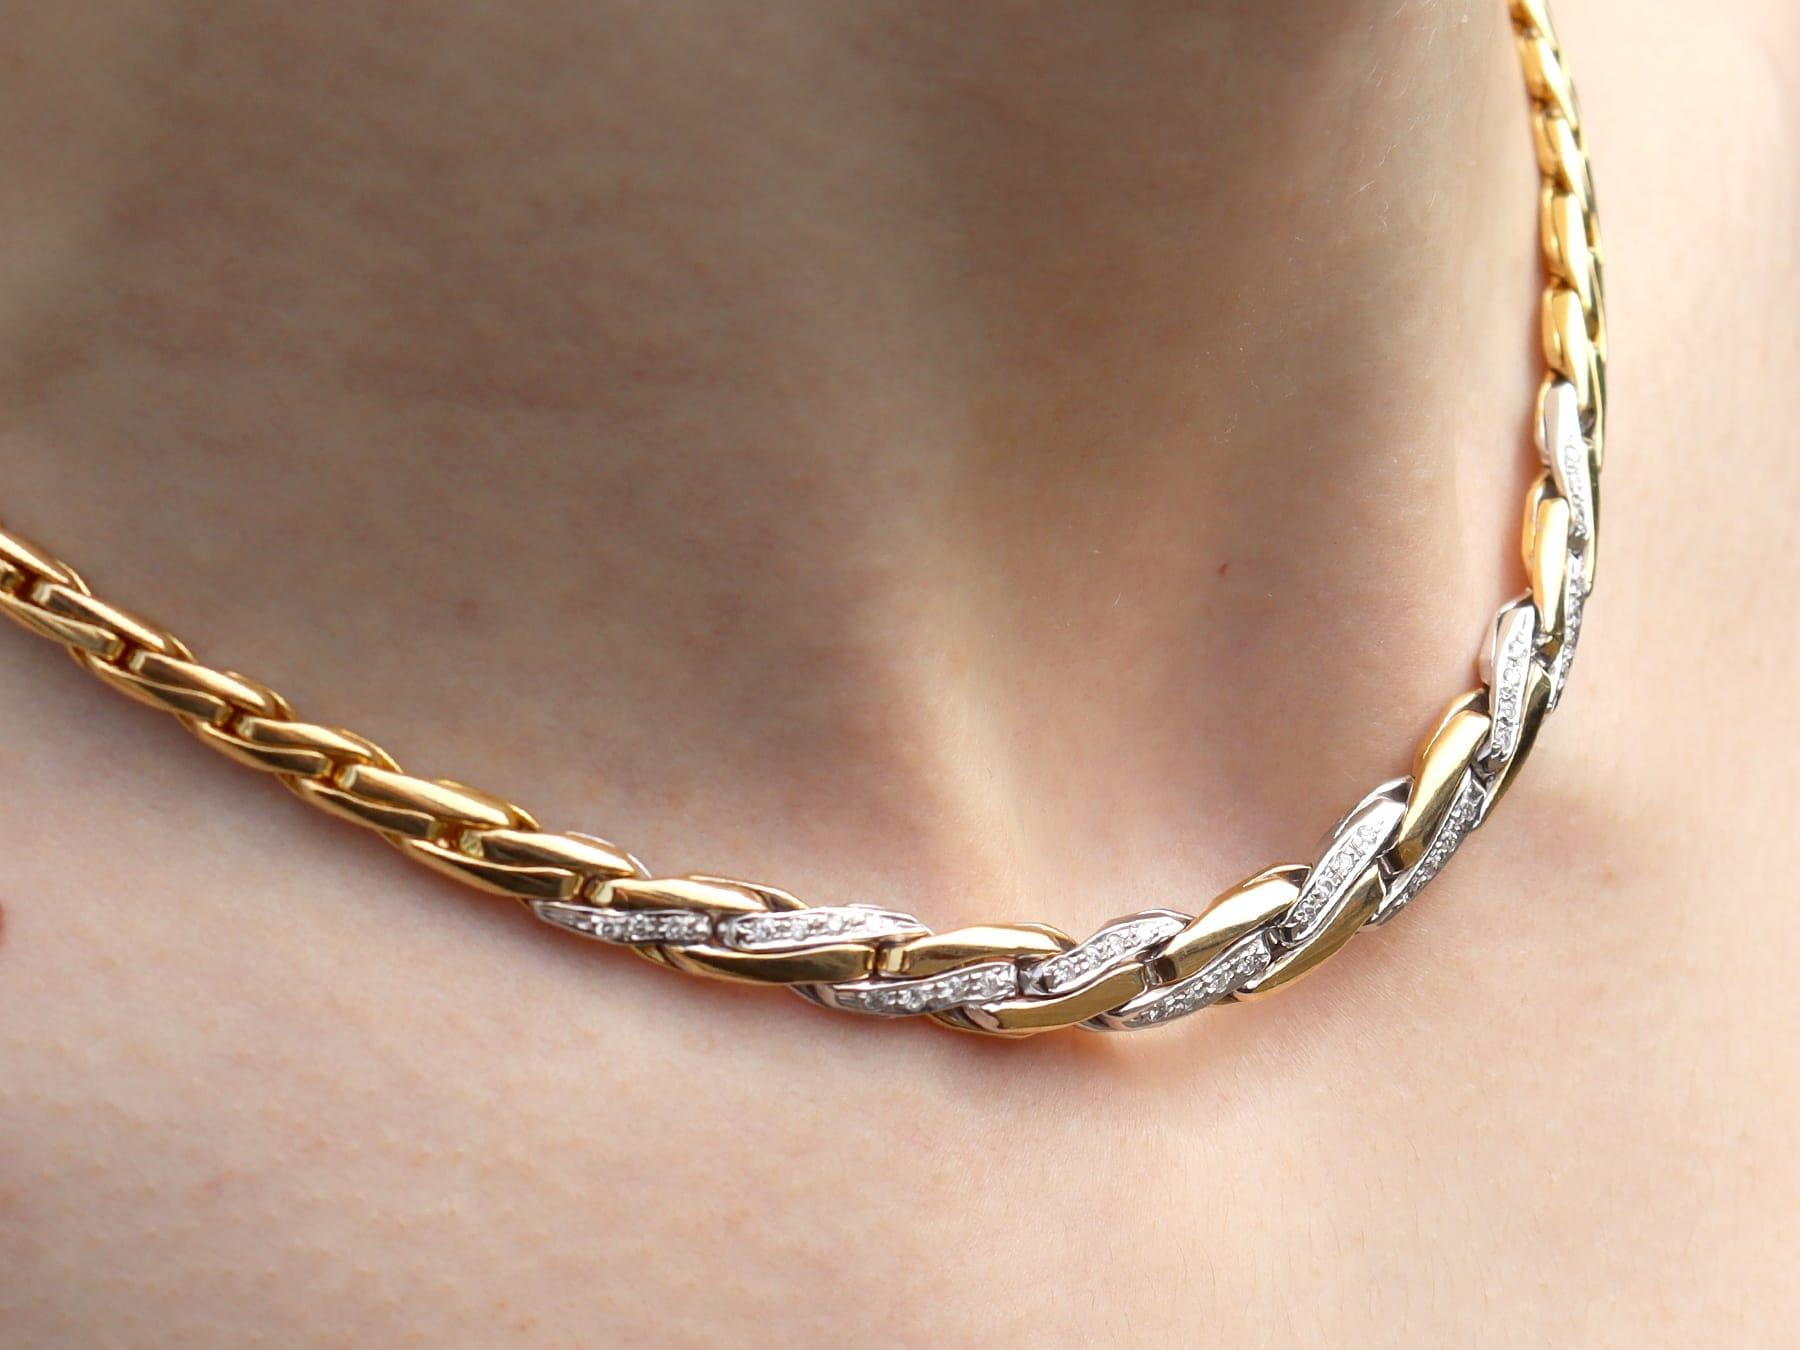 Vintage 0.62 Carat Diamond and 18k Yellow Gold Necklace For Sale 4